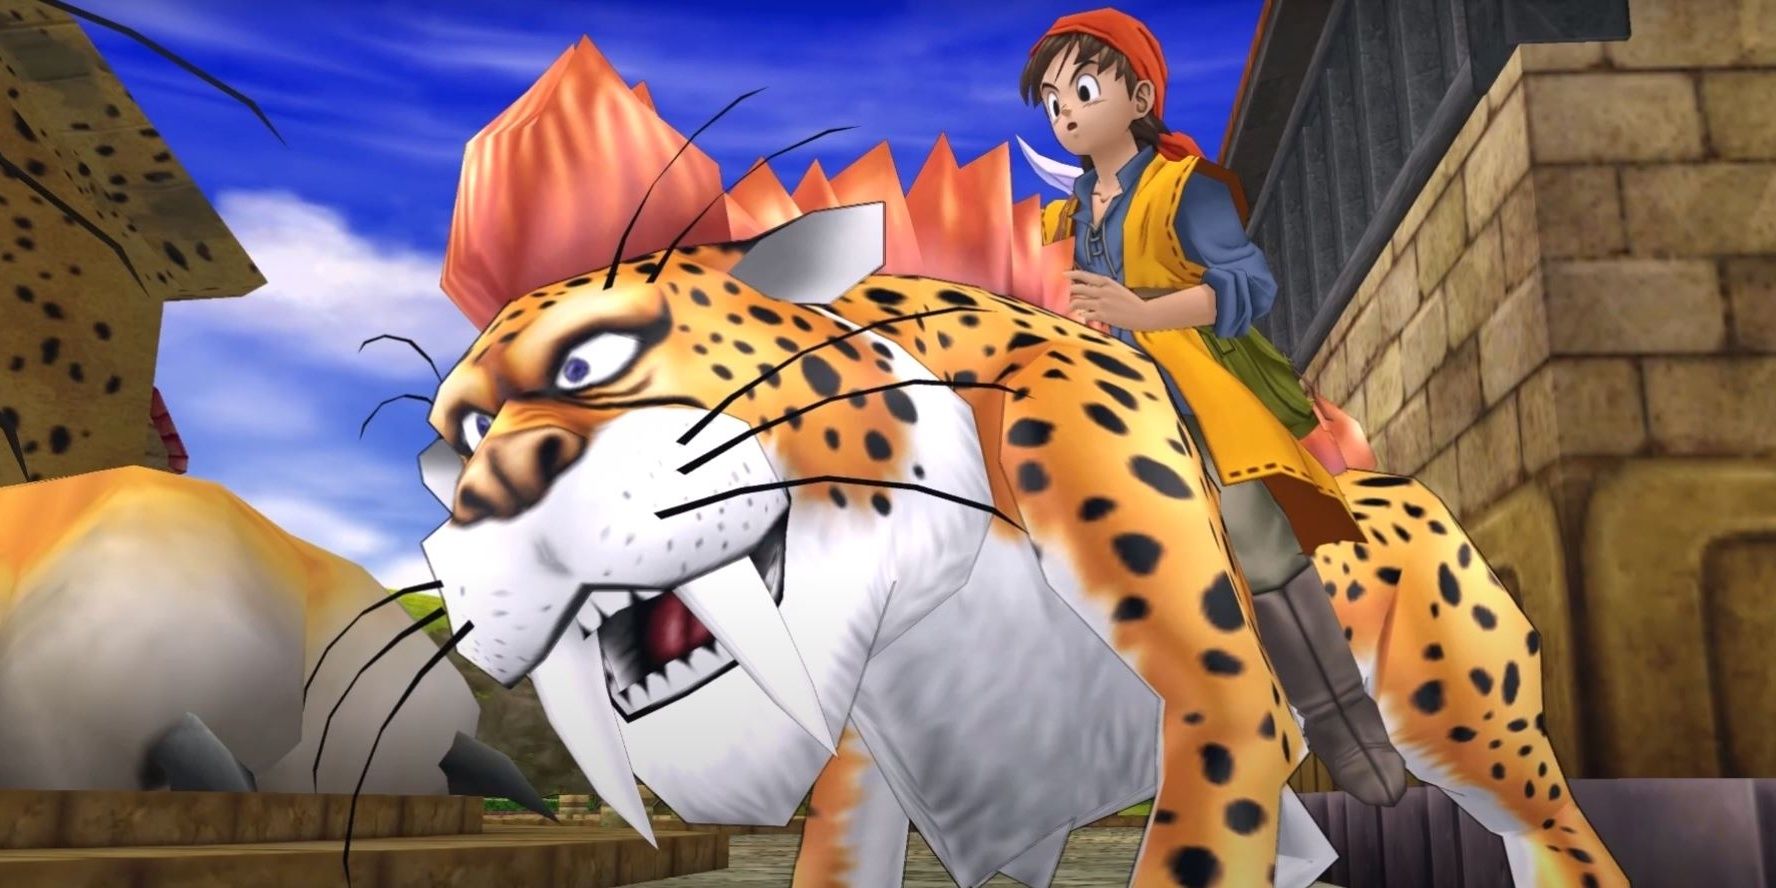 The hero mounting a great sabrecat in Dragon Quest VIII